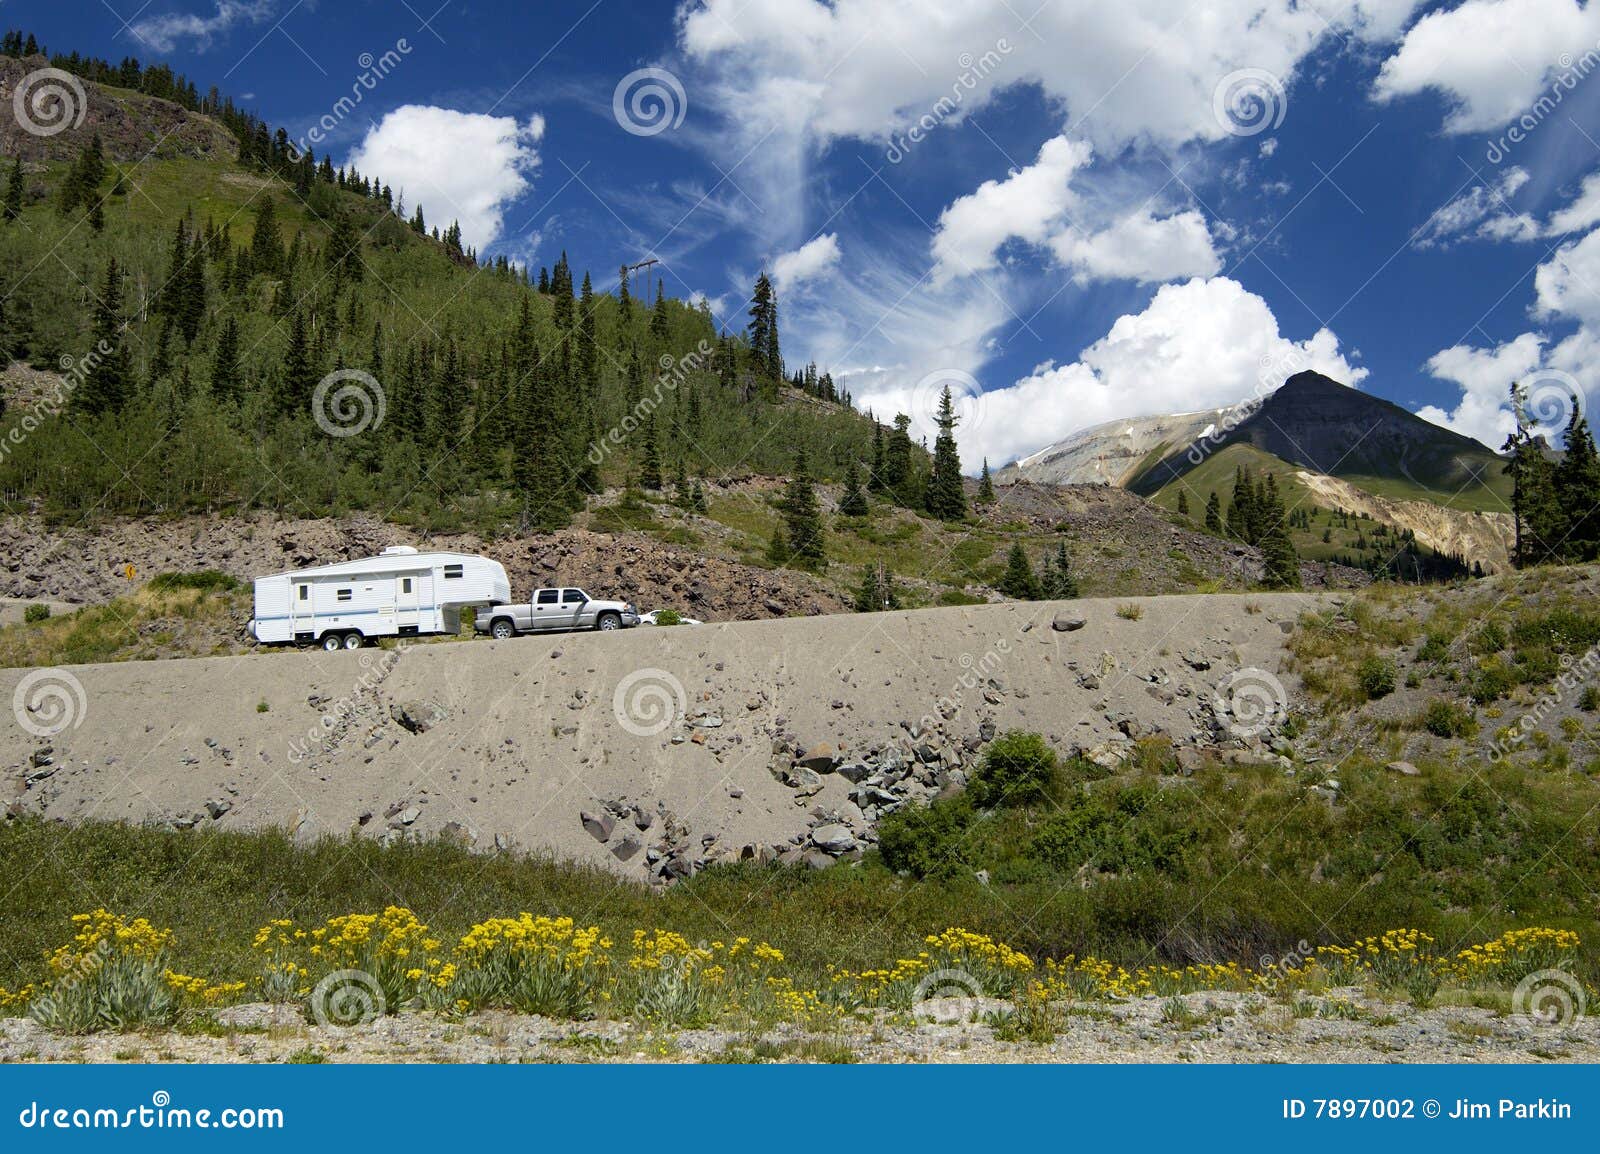 recreational vehicle in the mountains